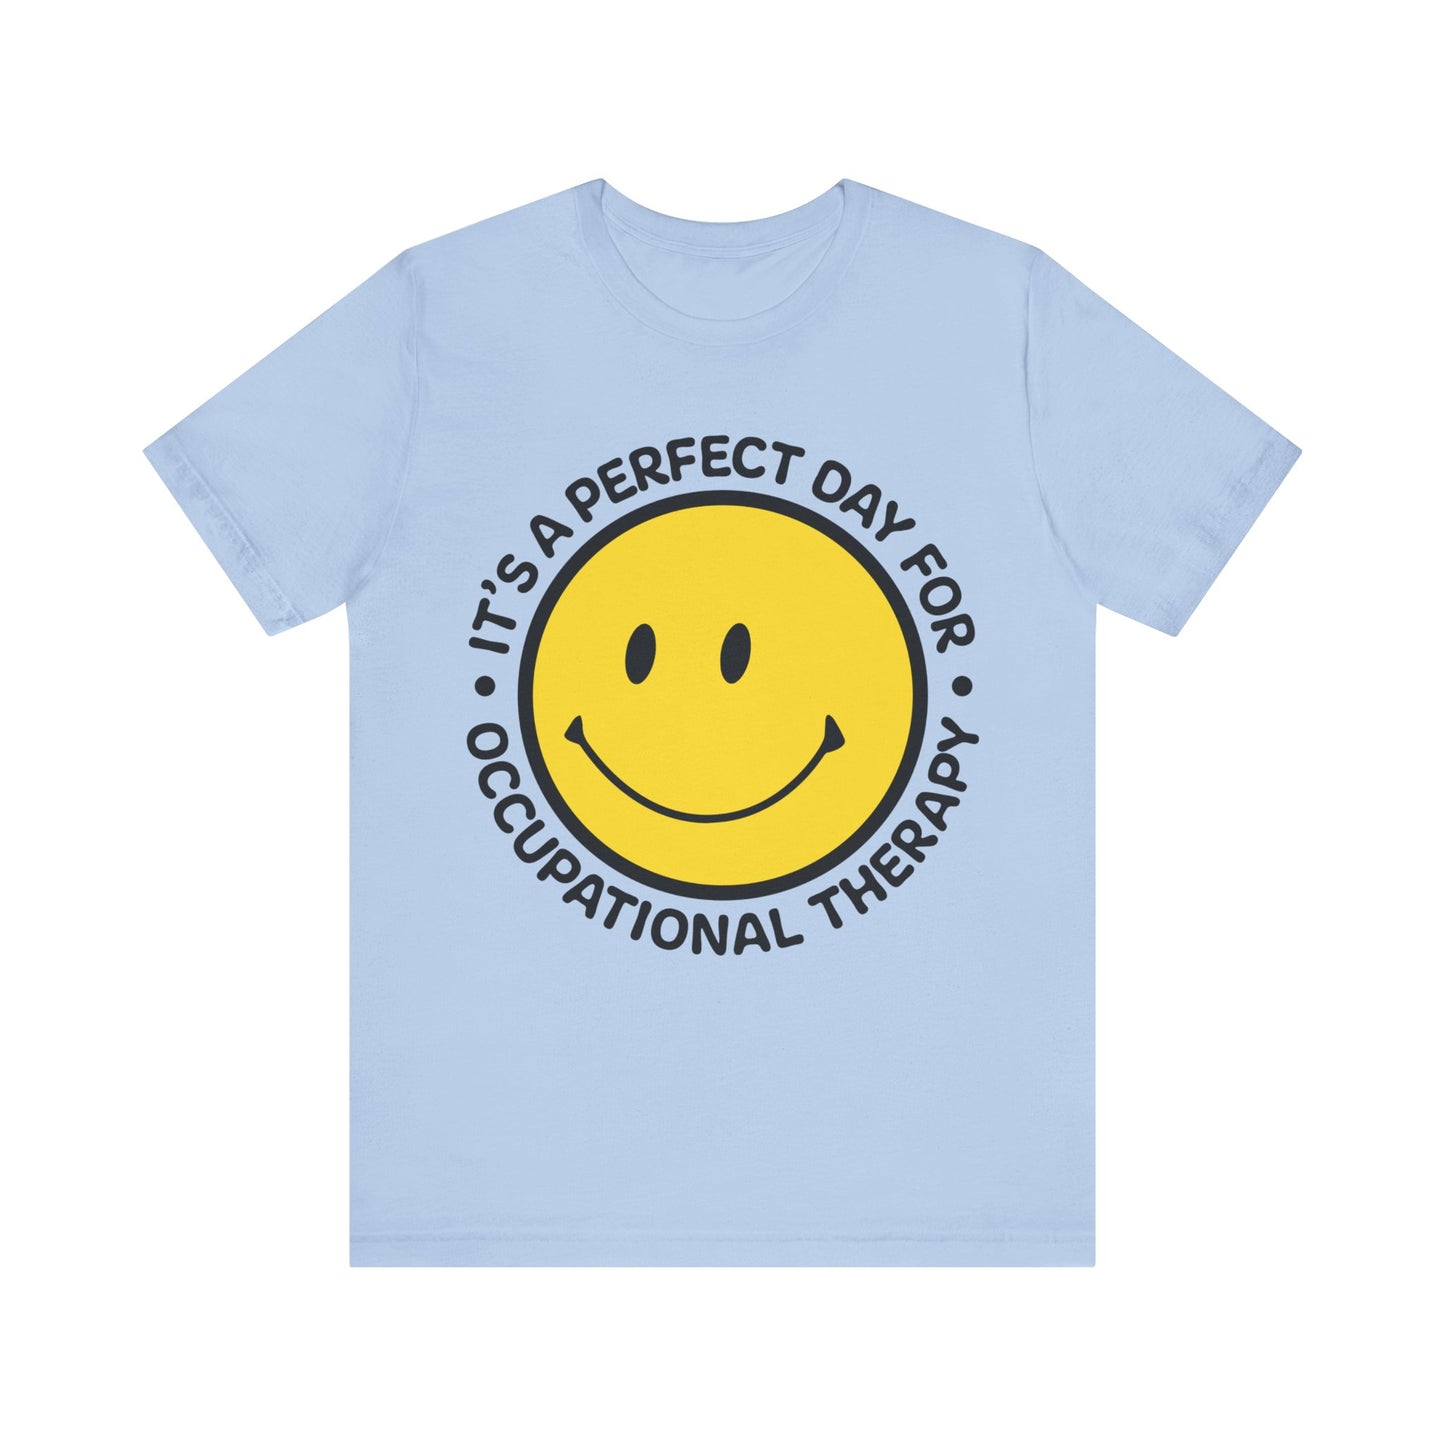 It's A Perfect Day For Occupational Therapy Shirt, OT Shirt, Therapist Shirt